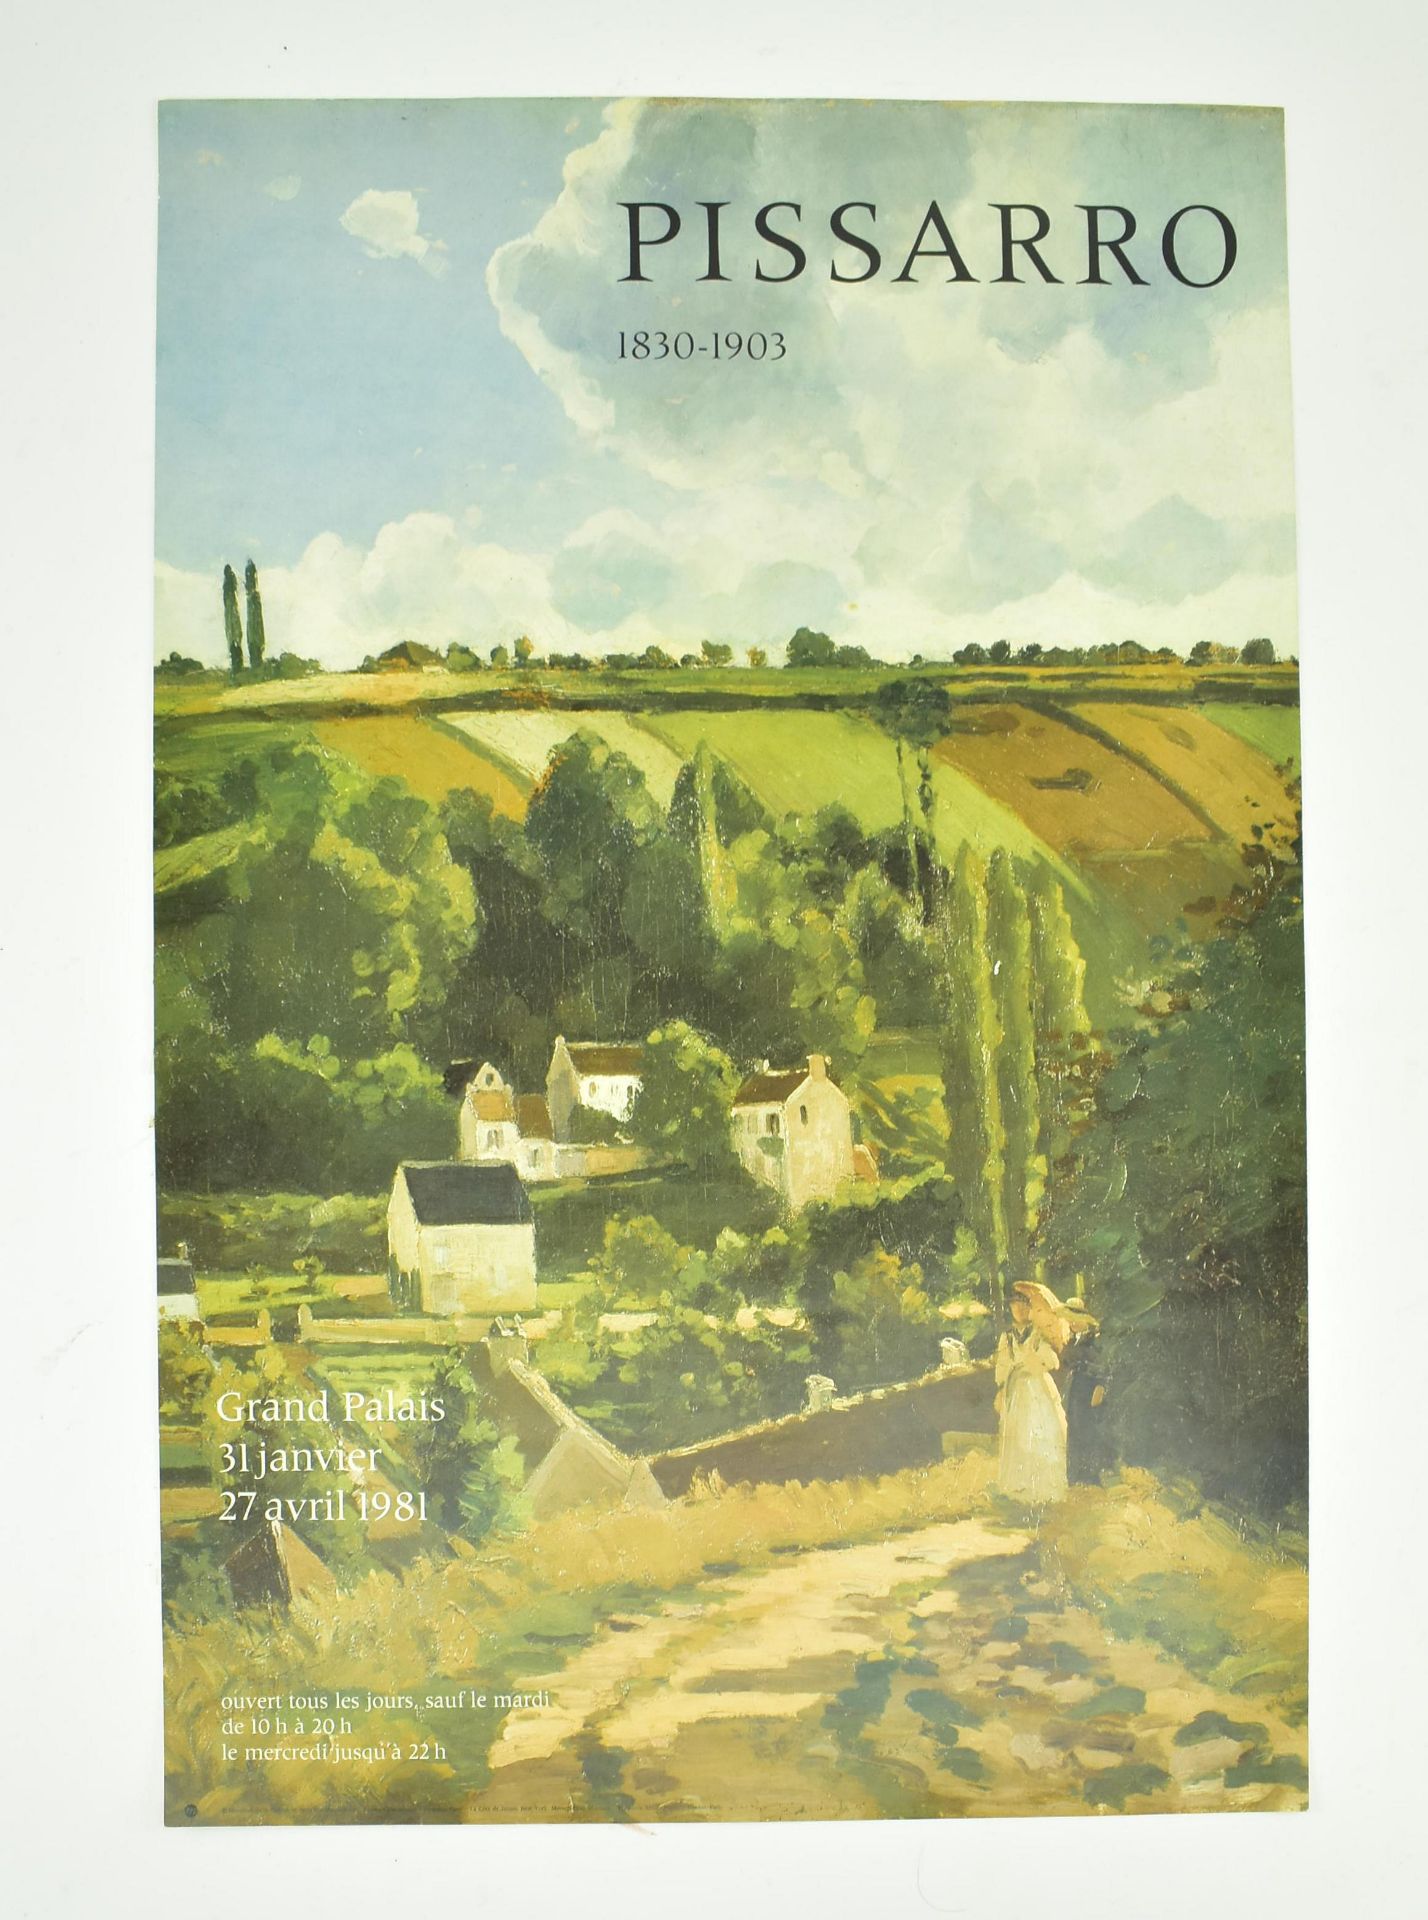 CAMILLE PISSARRO - GRAND PALAIS 1981 EXHIBITION POSTER - Image 2 of 5